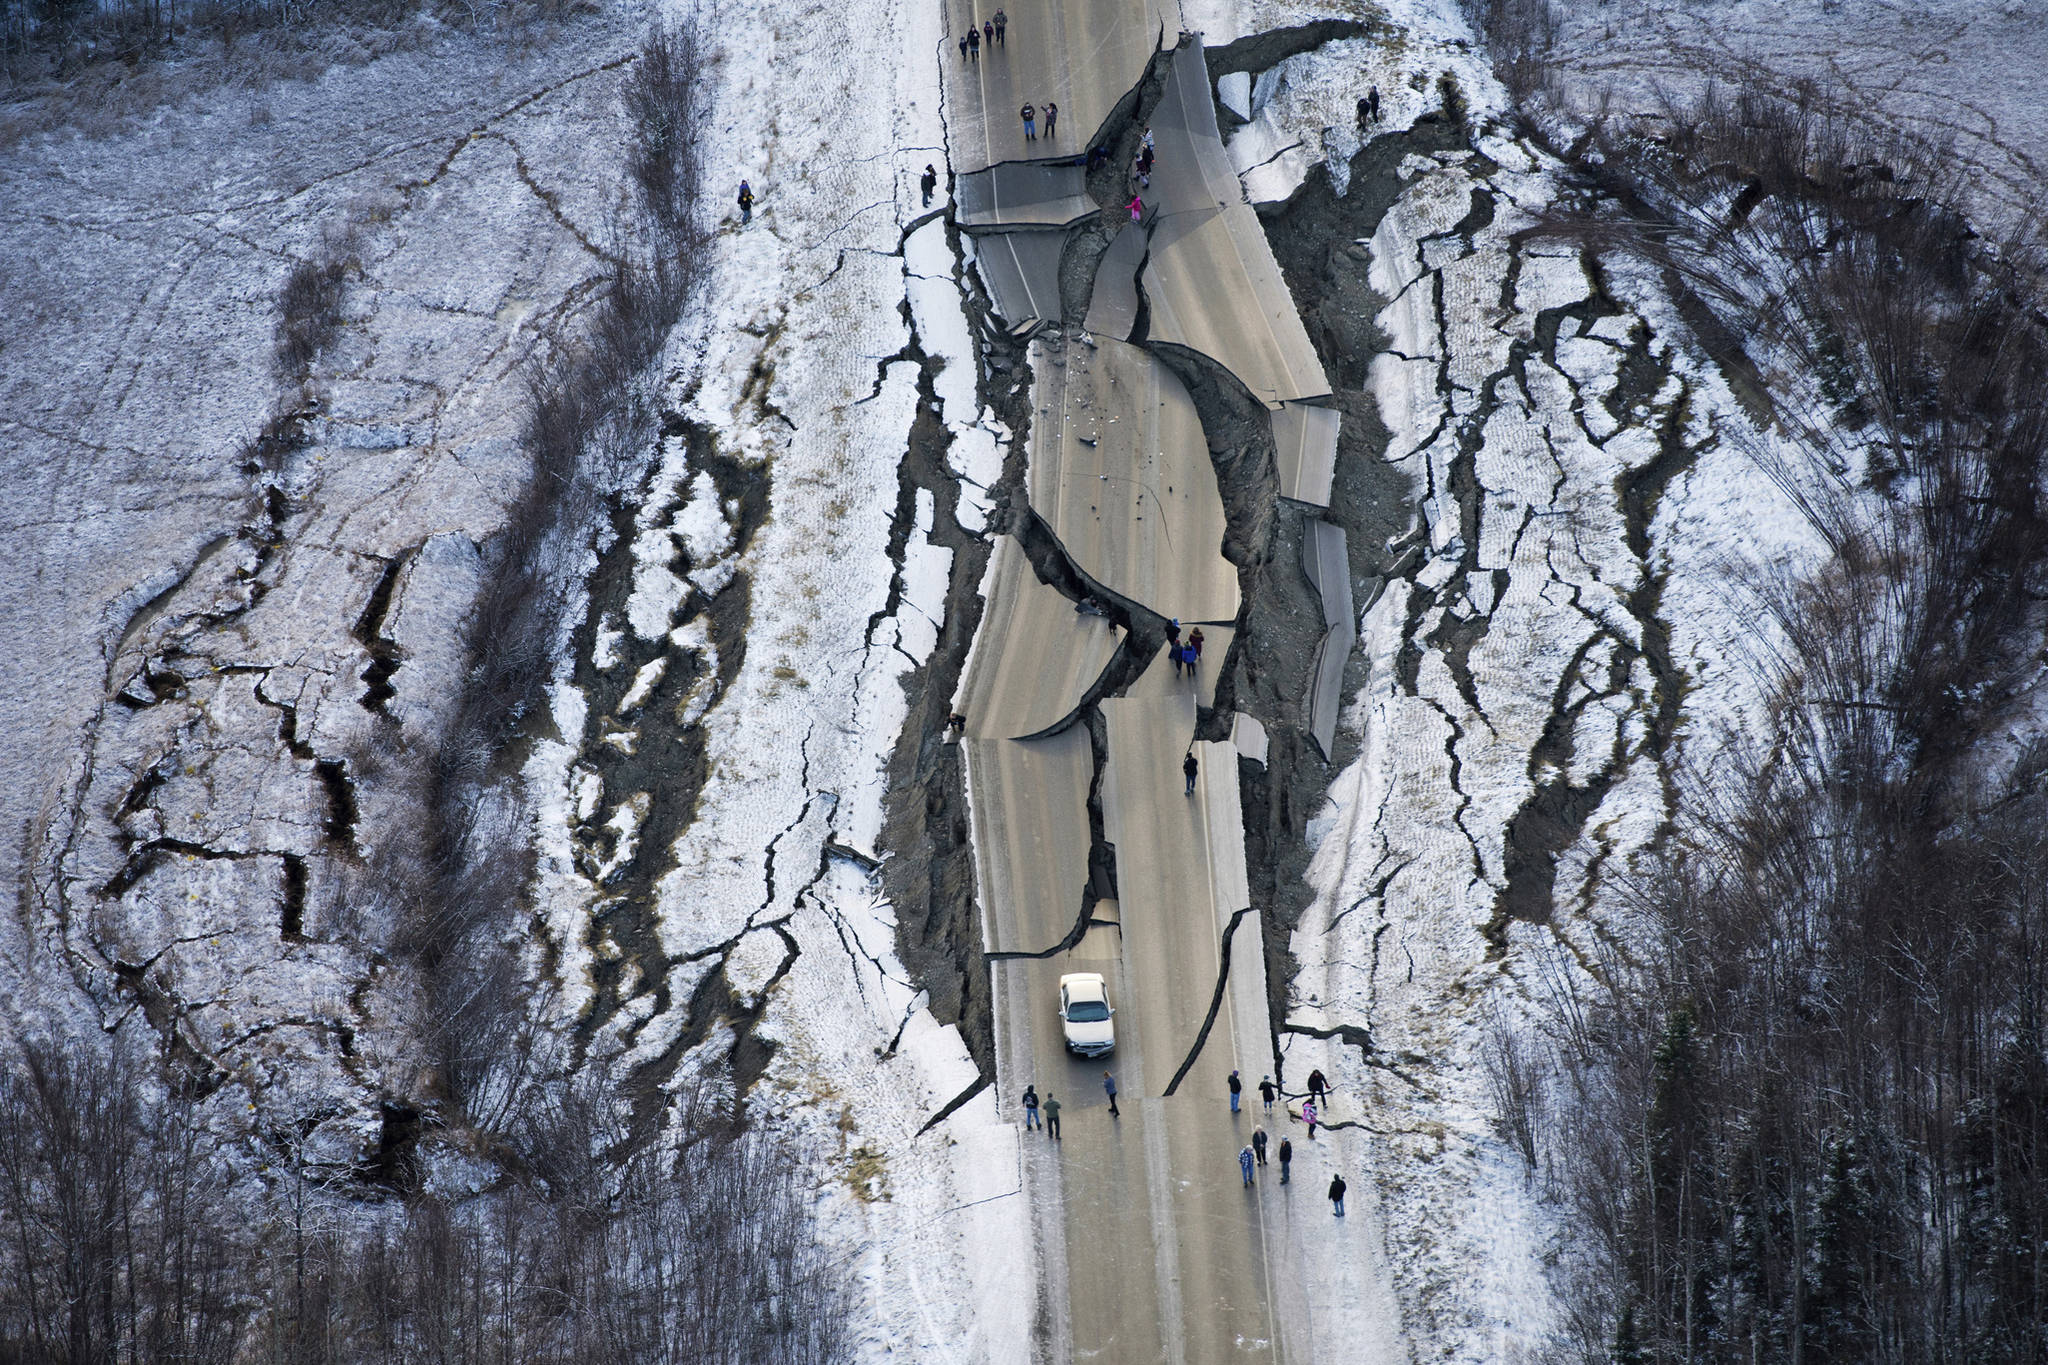 This aerial photo shows damage on Vine Road, south of Wasilla, Alaska, after earthquakes Friday, Nov. 30, 2018. Back-to-back earthquakes measuring 7.0 and 5.7 shattered highways and rocked buildings Friday in Anchorage and the surrounding area, sending people running into the streets and briefly triggering a tsunami warning for islands and coastal areas south of the city. (Marc Lester | Anchorage Daily News)